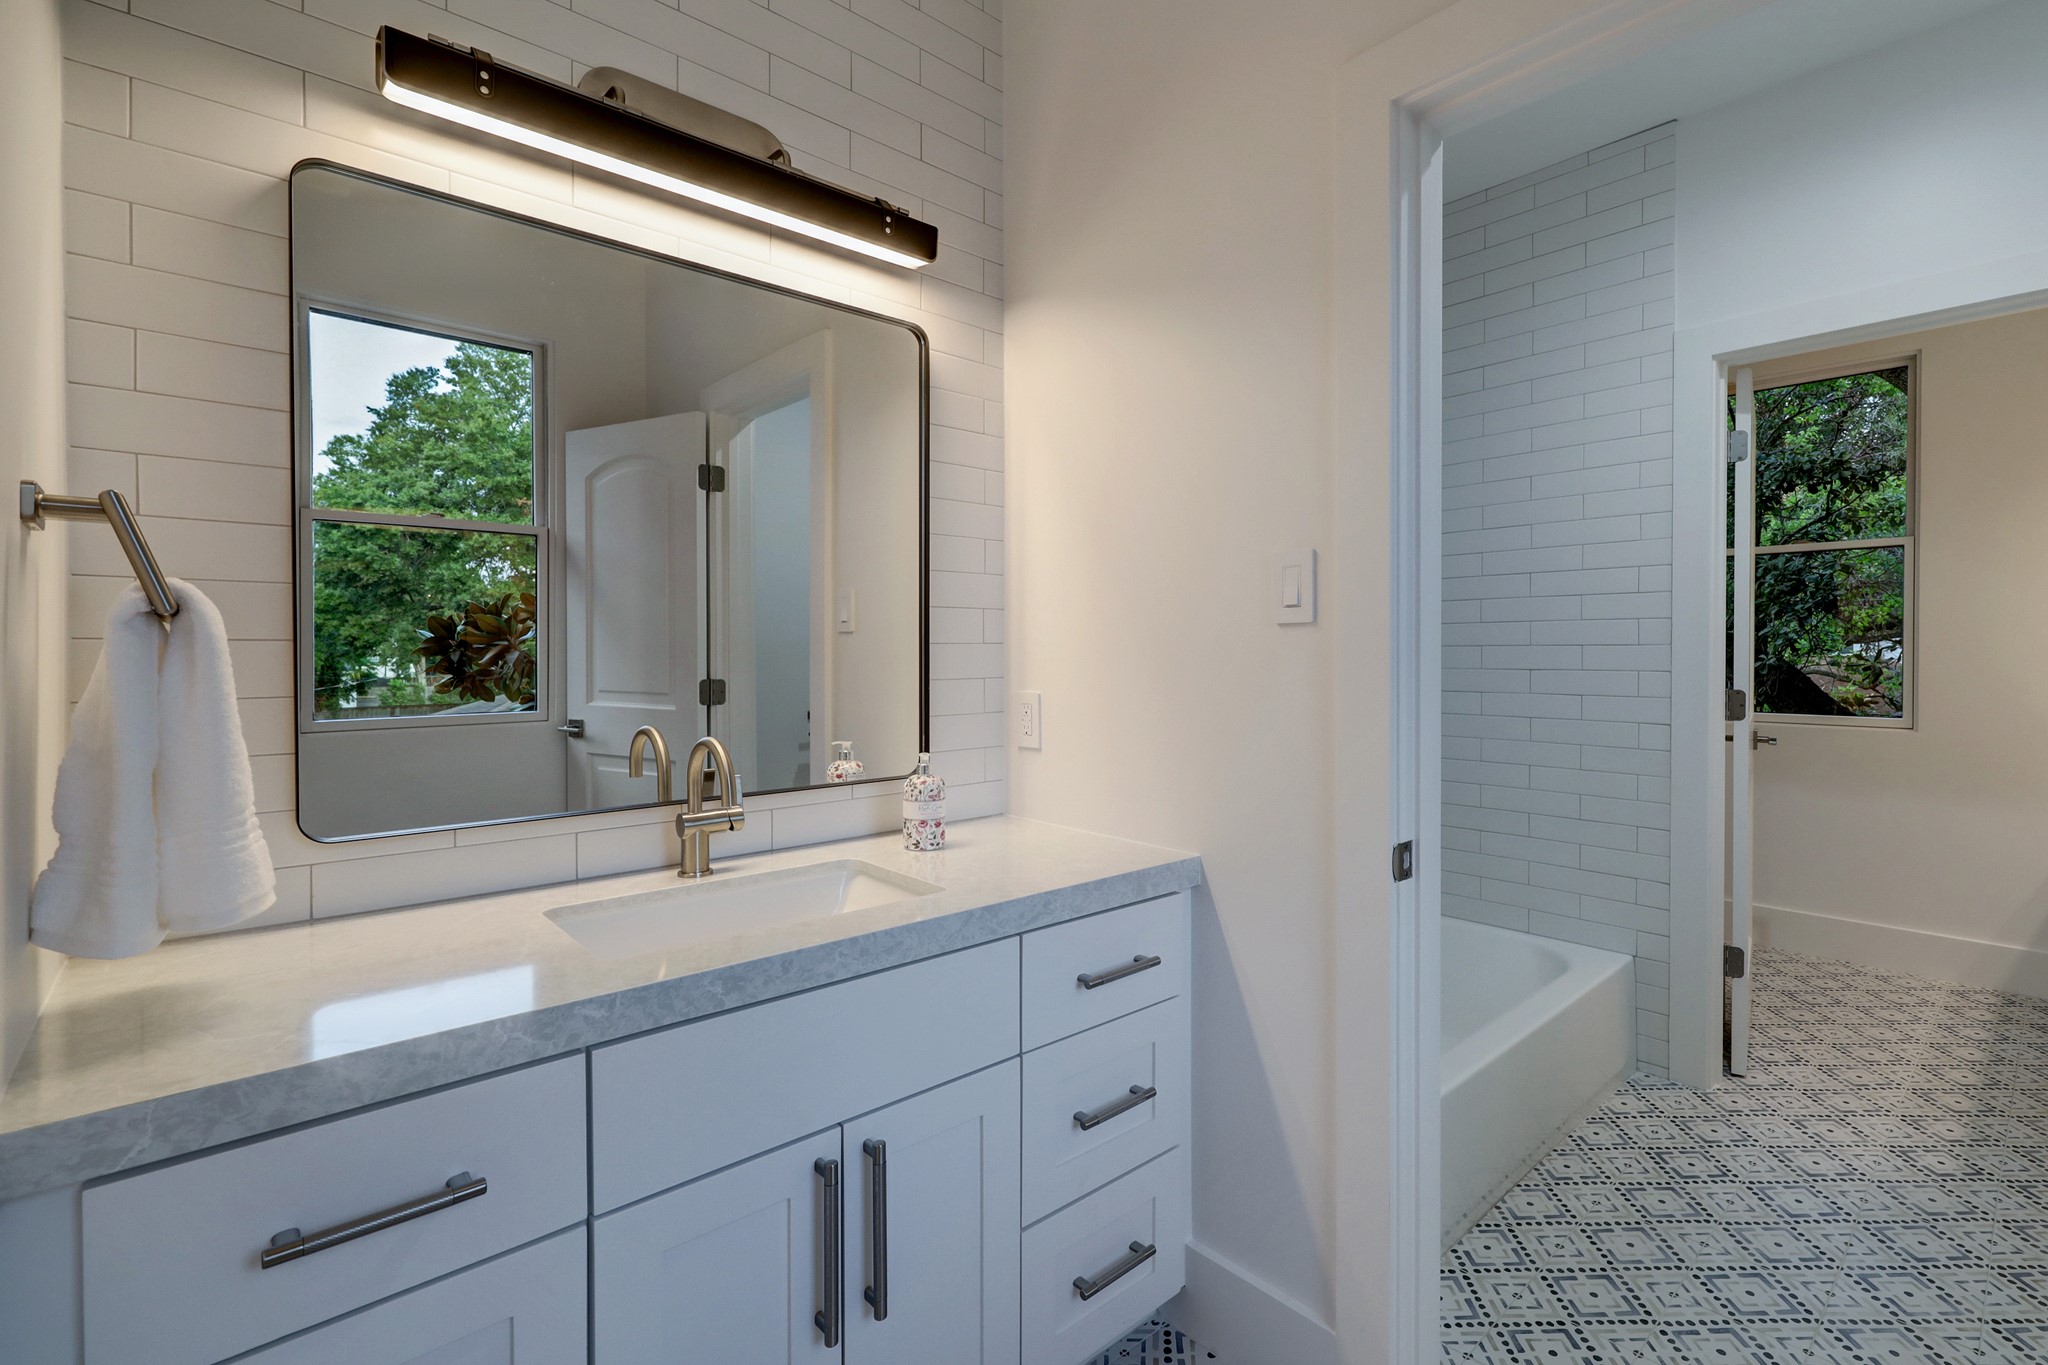 Hollywood / conjoining bath with separate vanity areas and a tub'/shower combination.